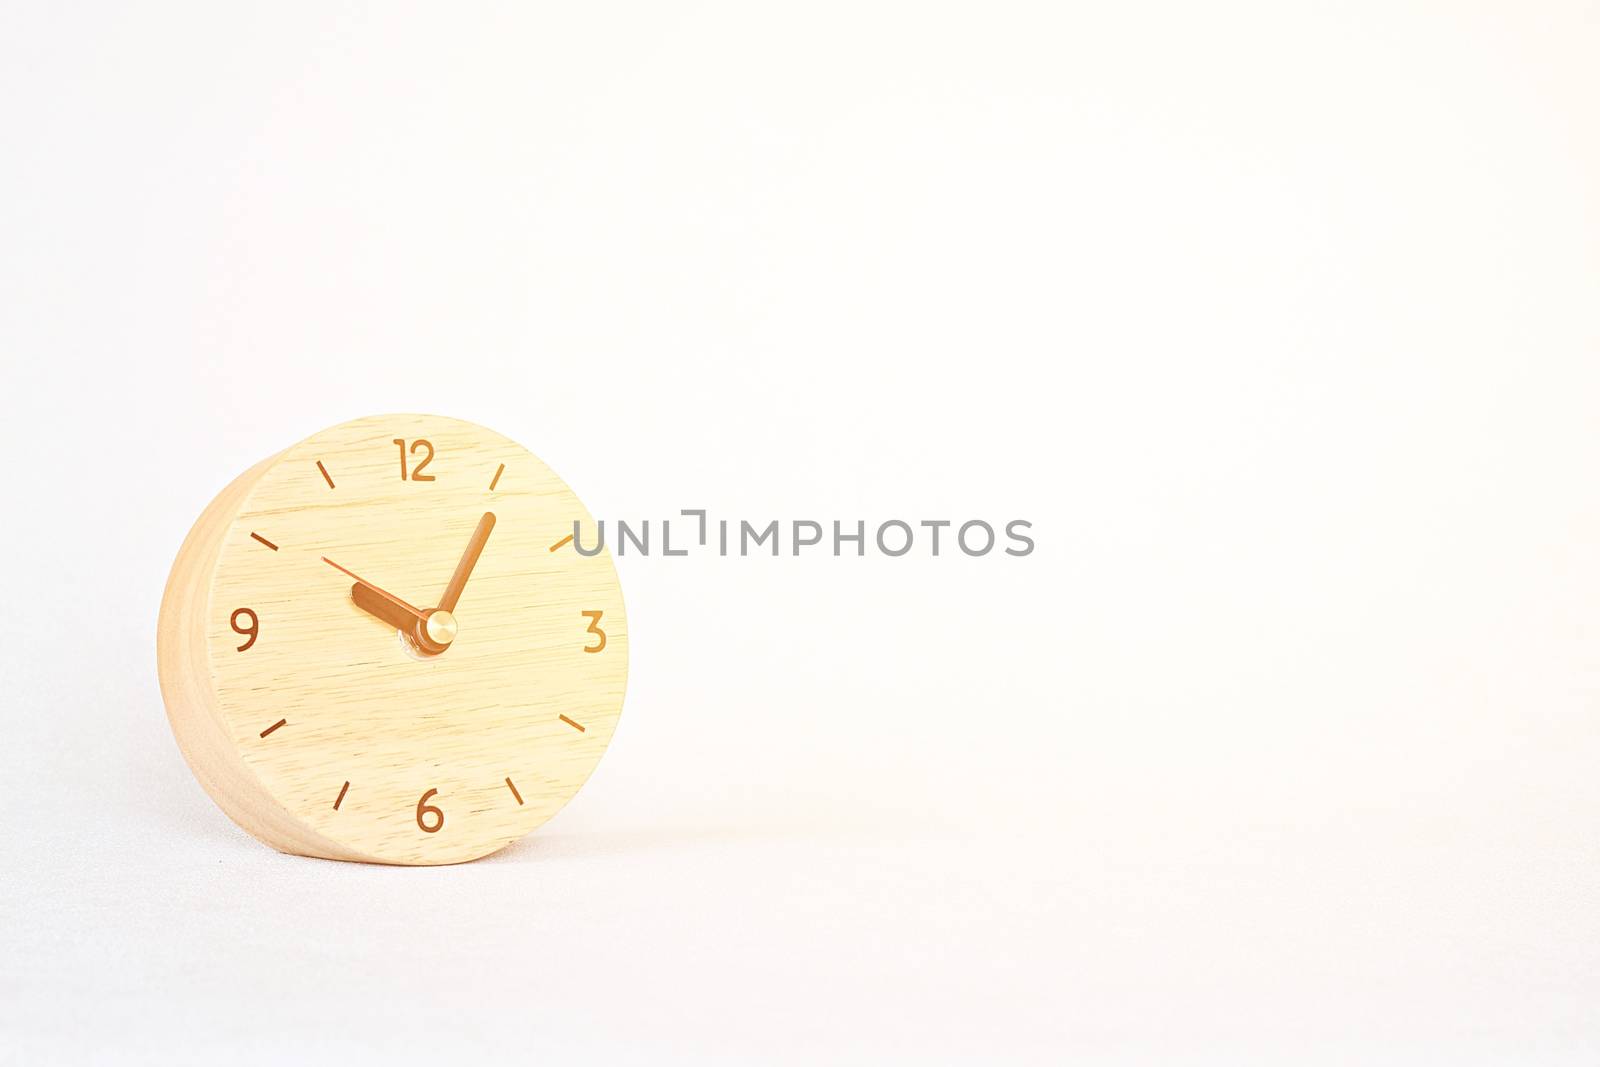 Business, savings time, deadline or delay concept : wooden alarm clock on white background